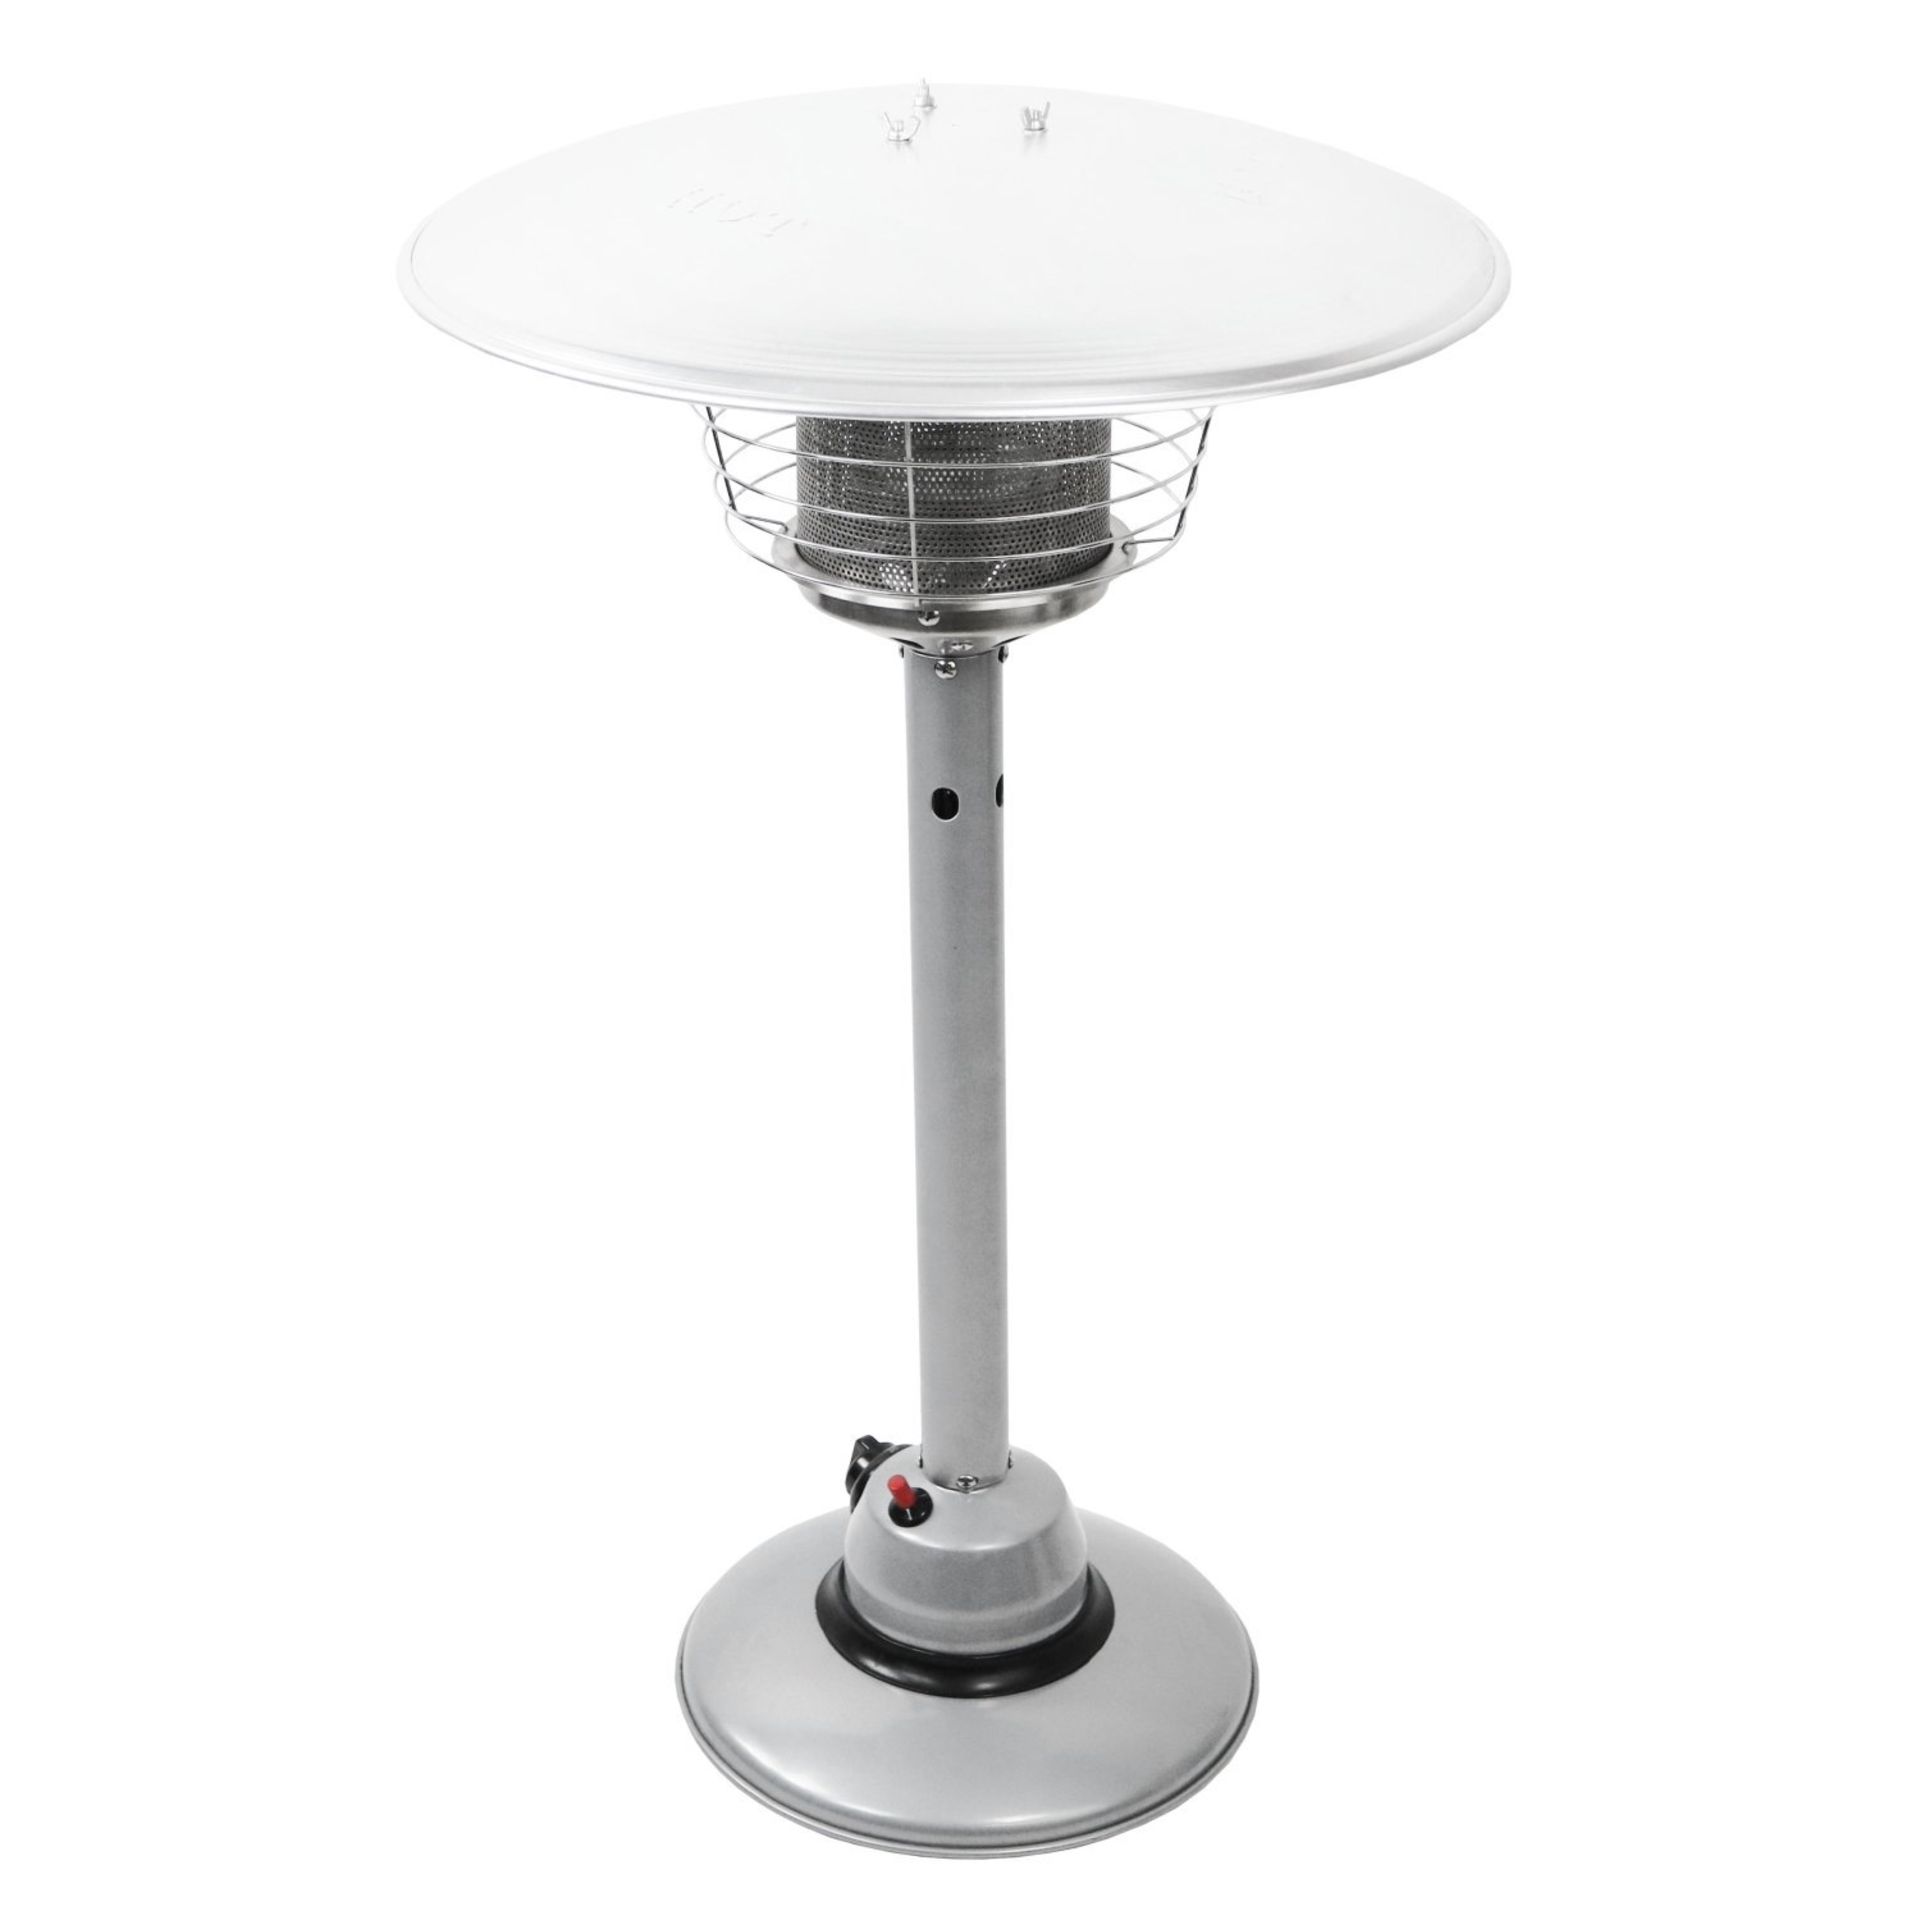 (EE495) Table Top 4KW Outdoor Gas Patio Heater c/w Hose & Regulator One of the most powerful... - Image 2 of 2